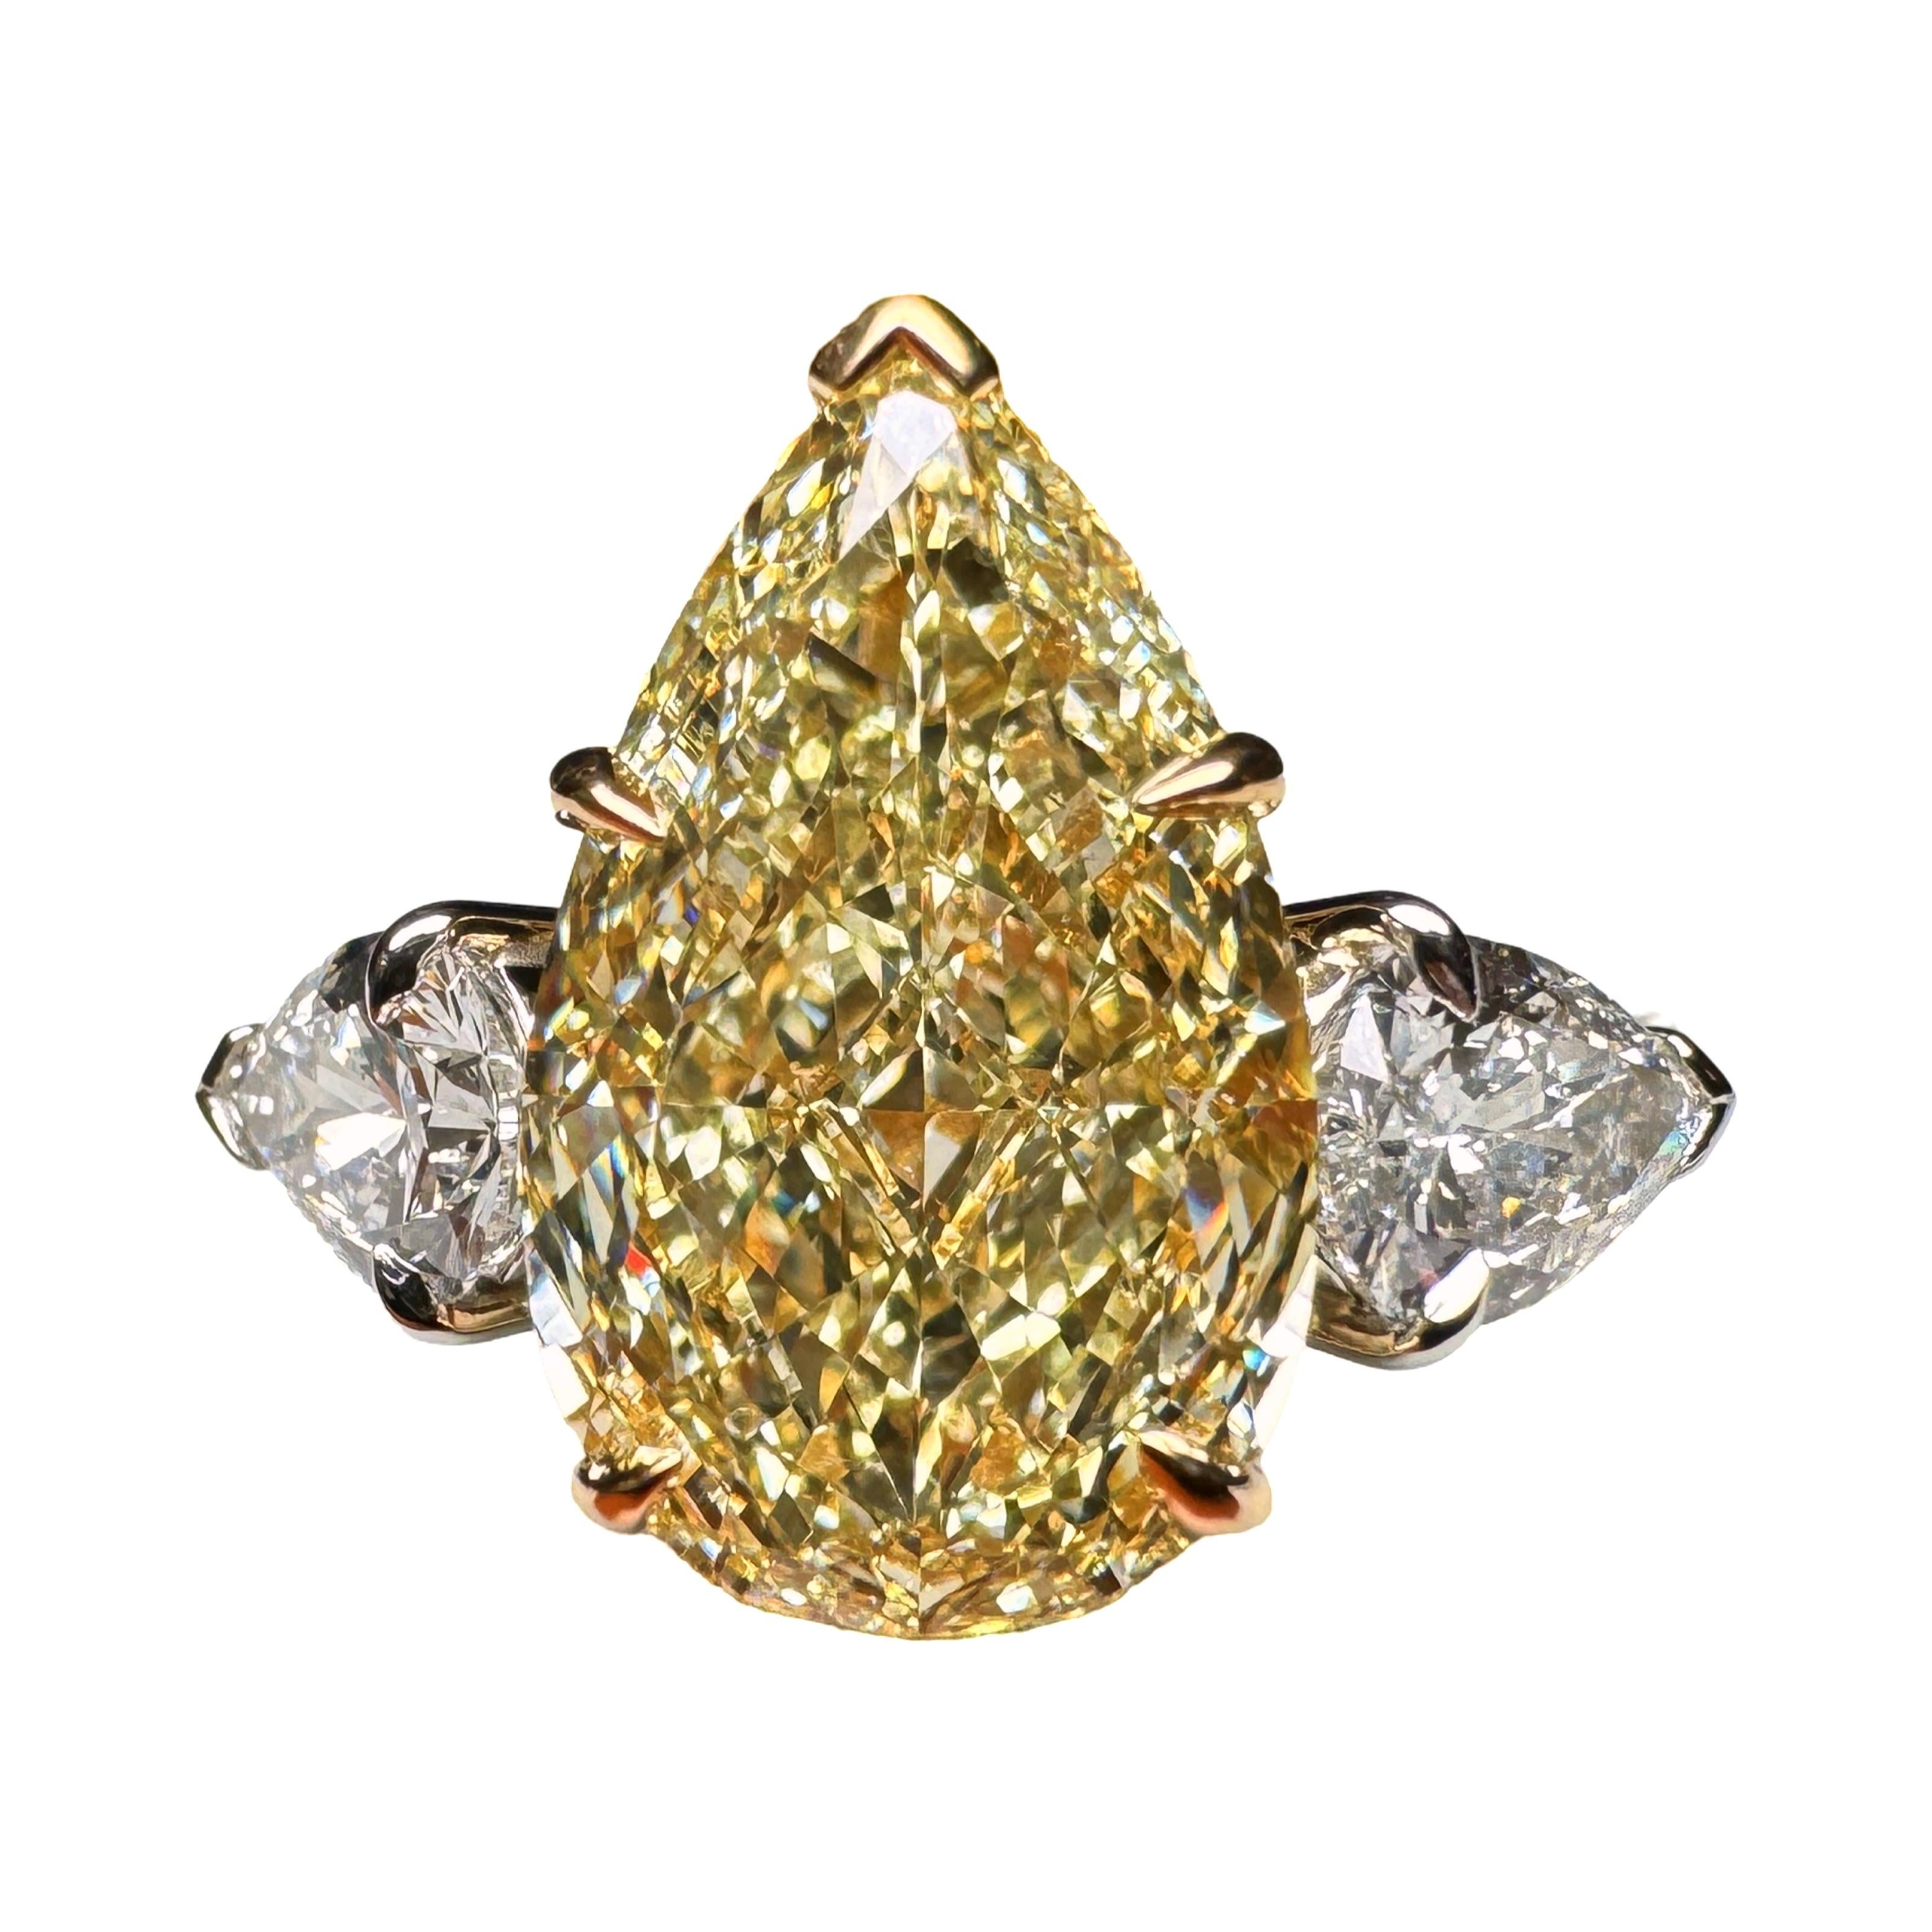 GIA Certified 4.01 Carat Pear Cut Yellow Diamond 3 Stone Ring For Sale 1